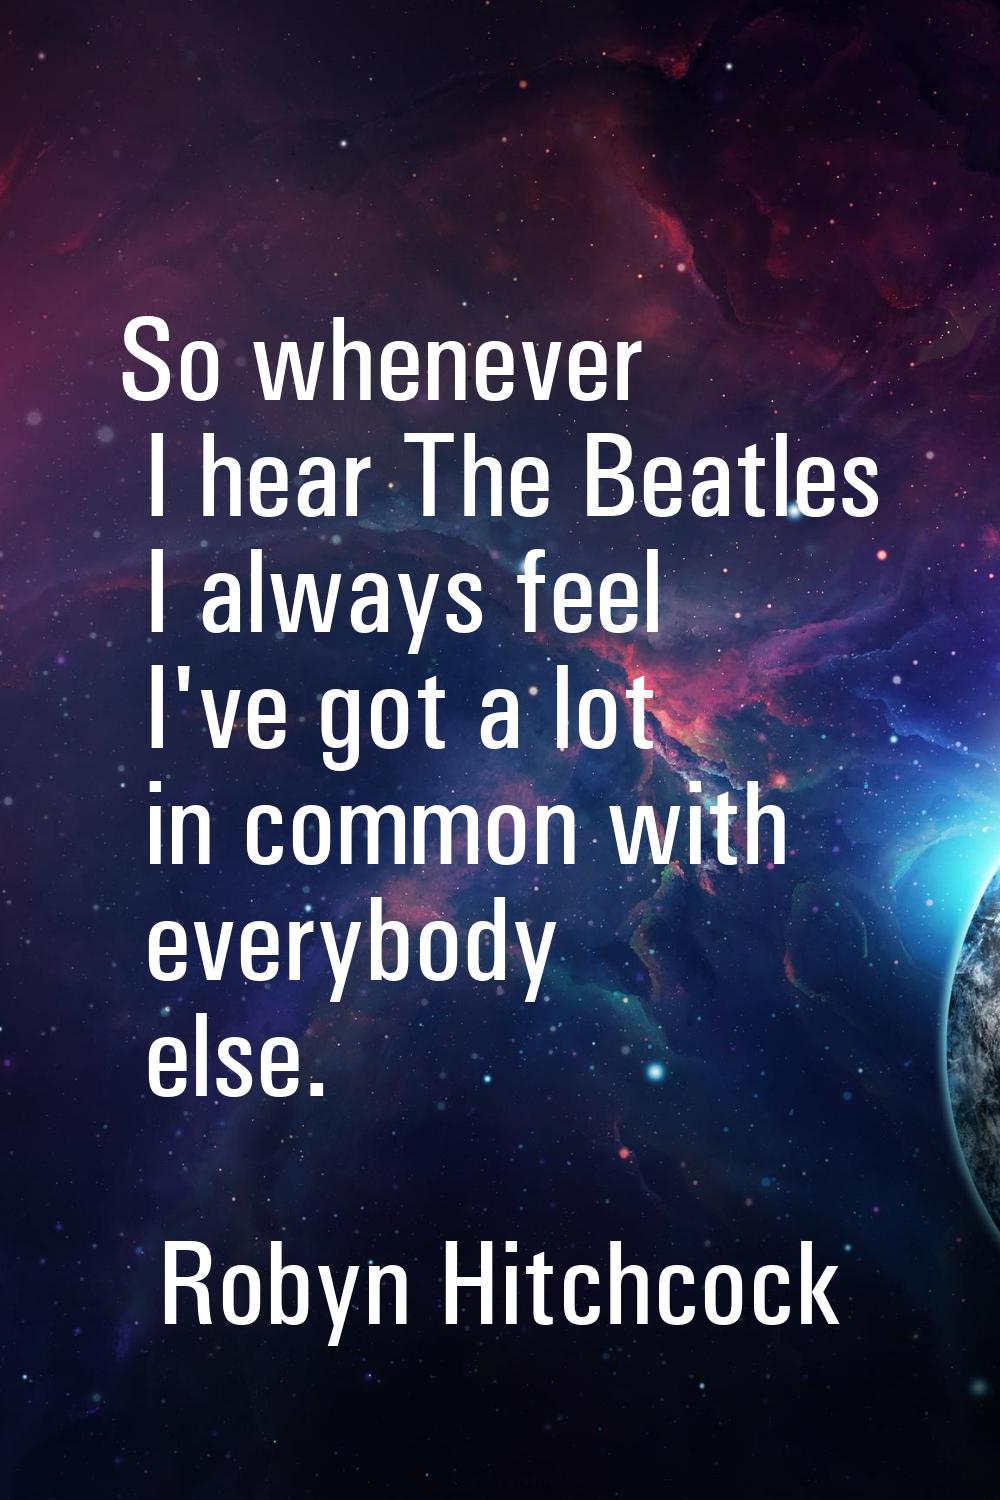 So whenever I hear The Beatles I always feel I've got a lot in common with everybody else.